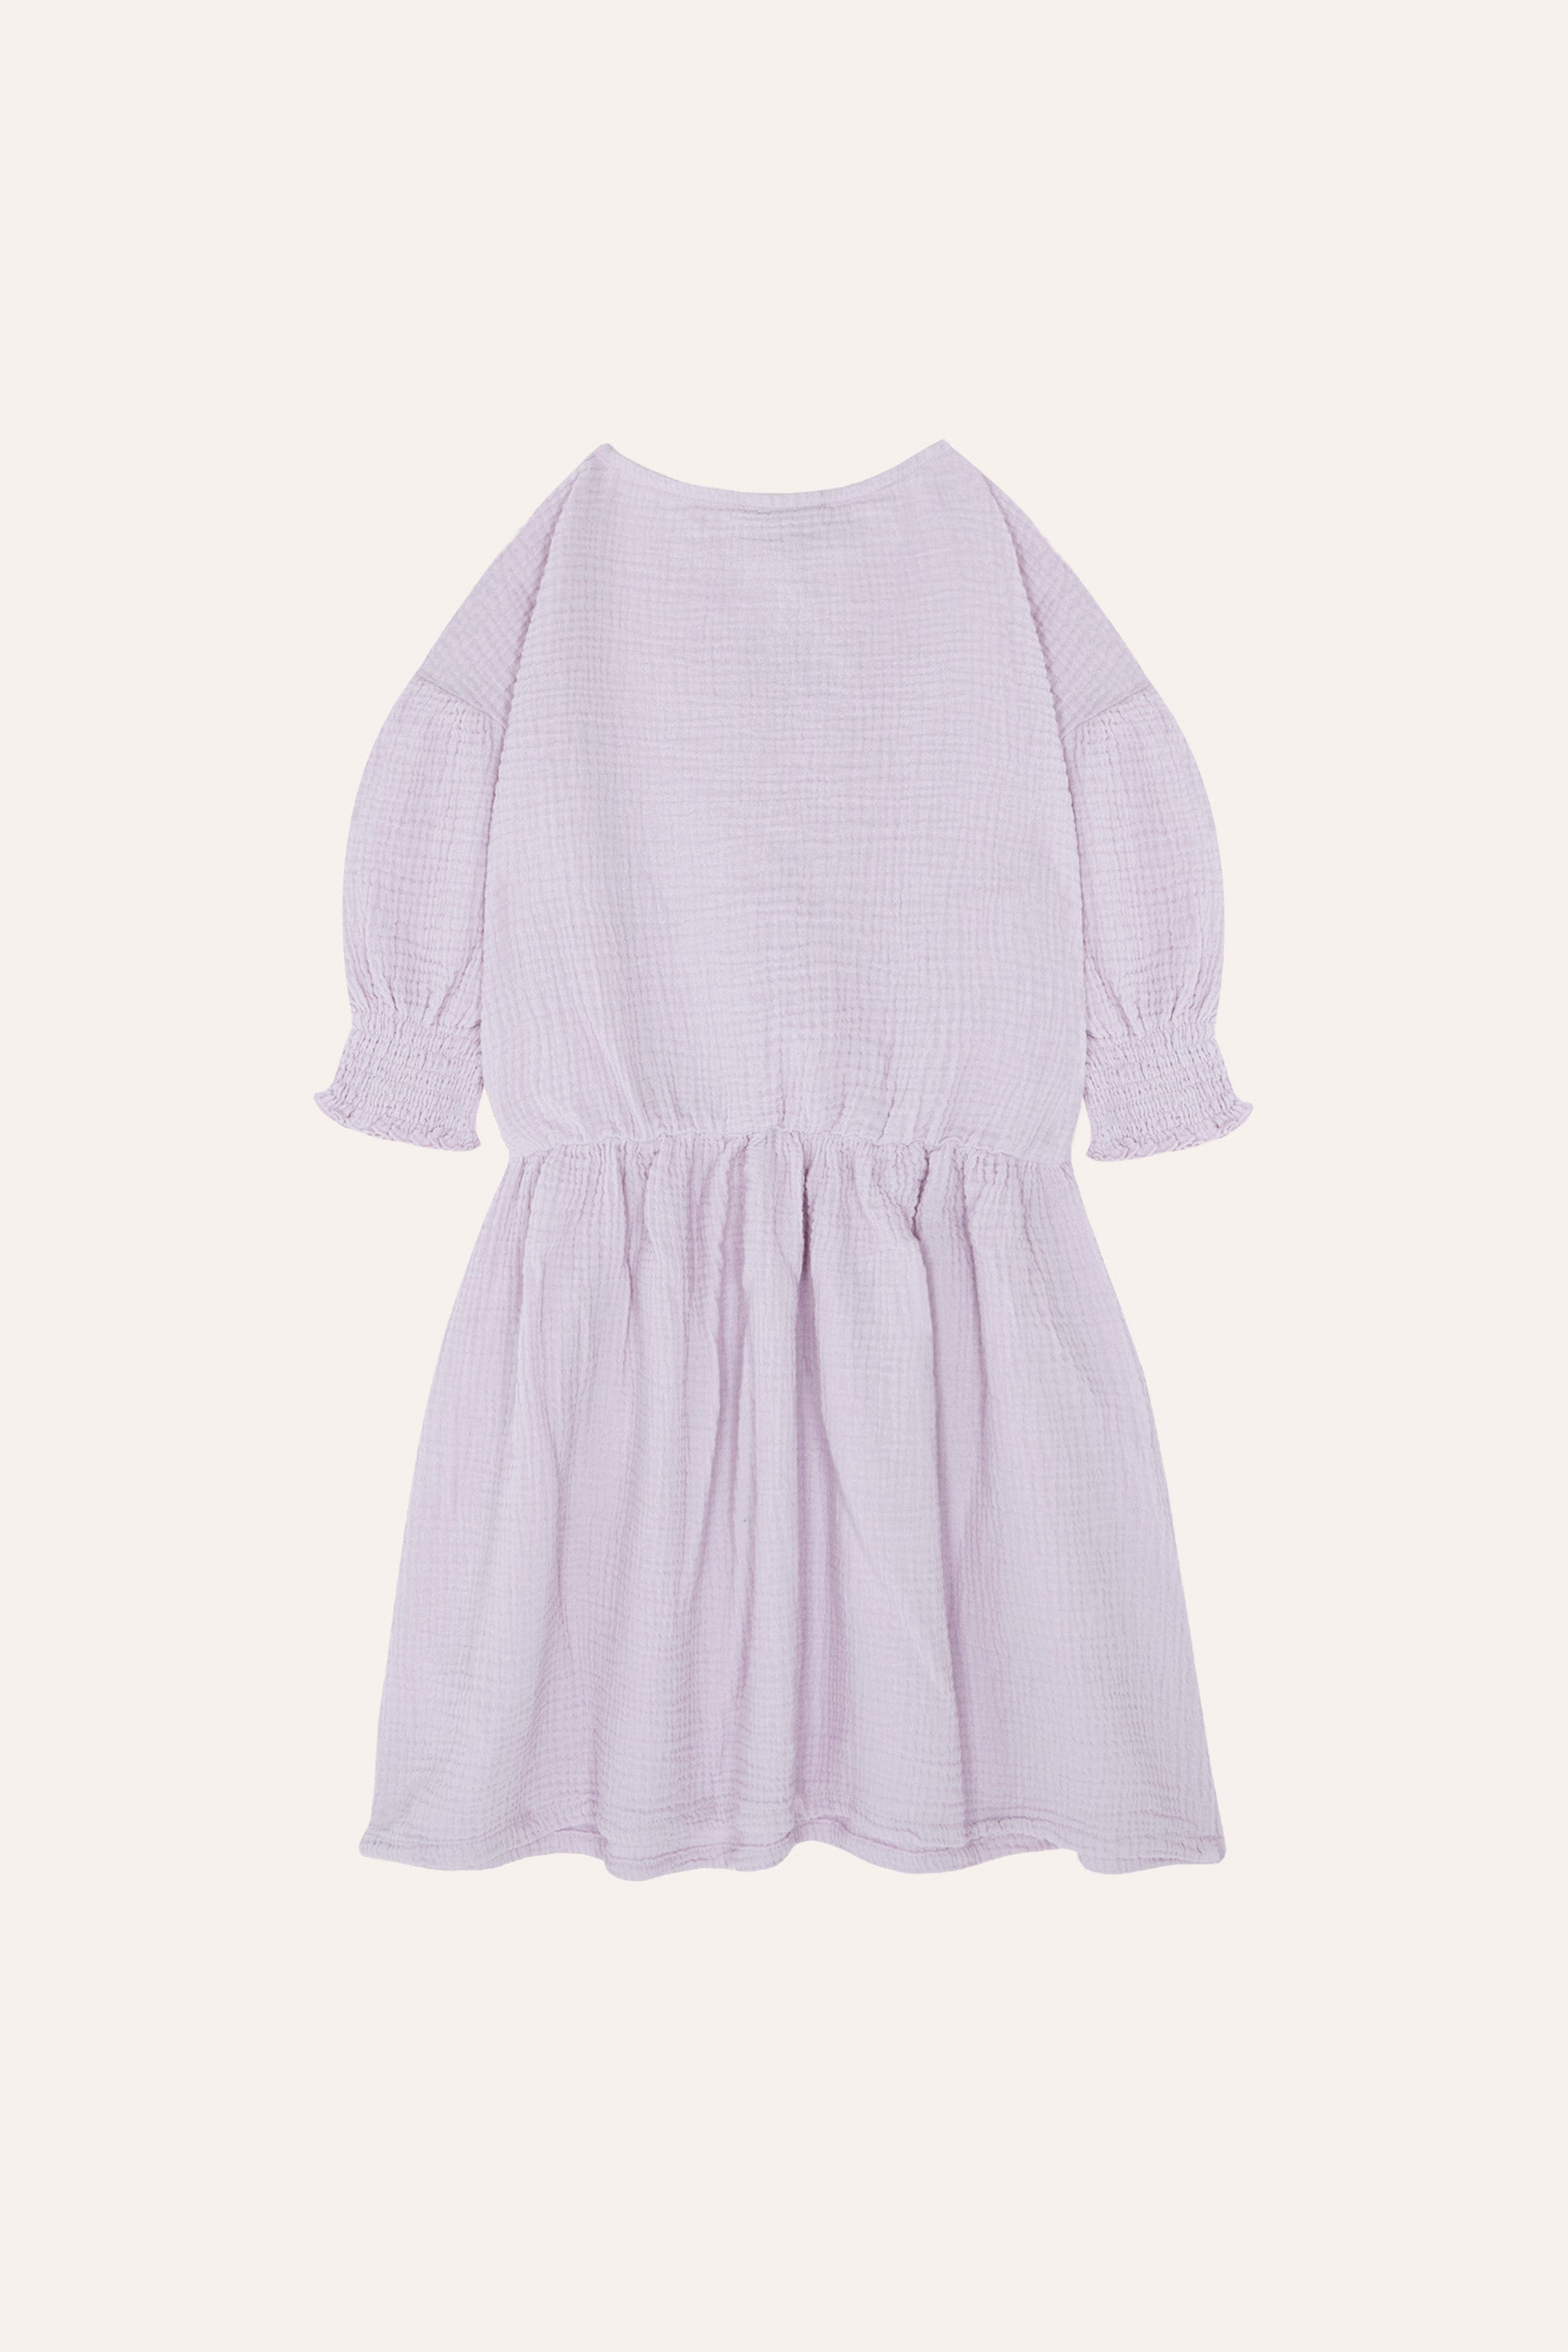 The Campamento - flowers embroidery kids dress